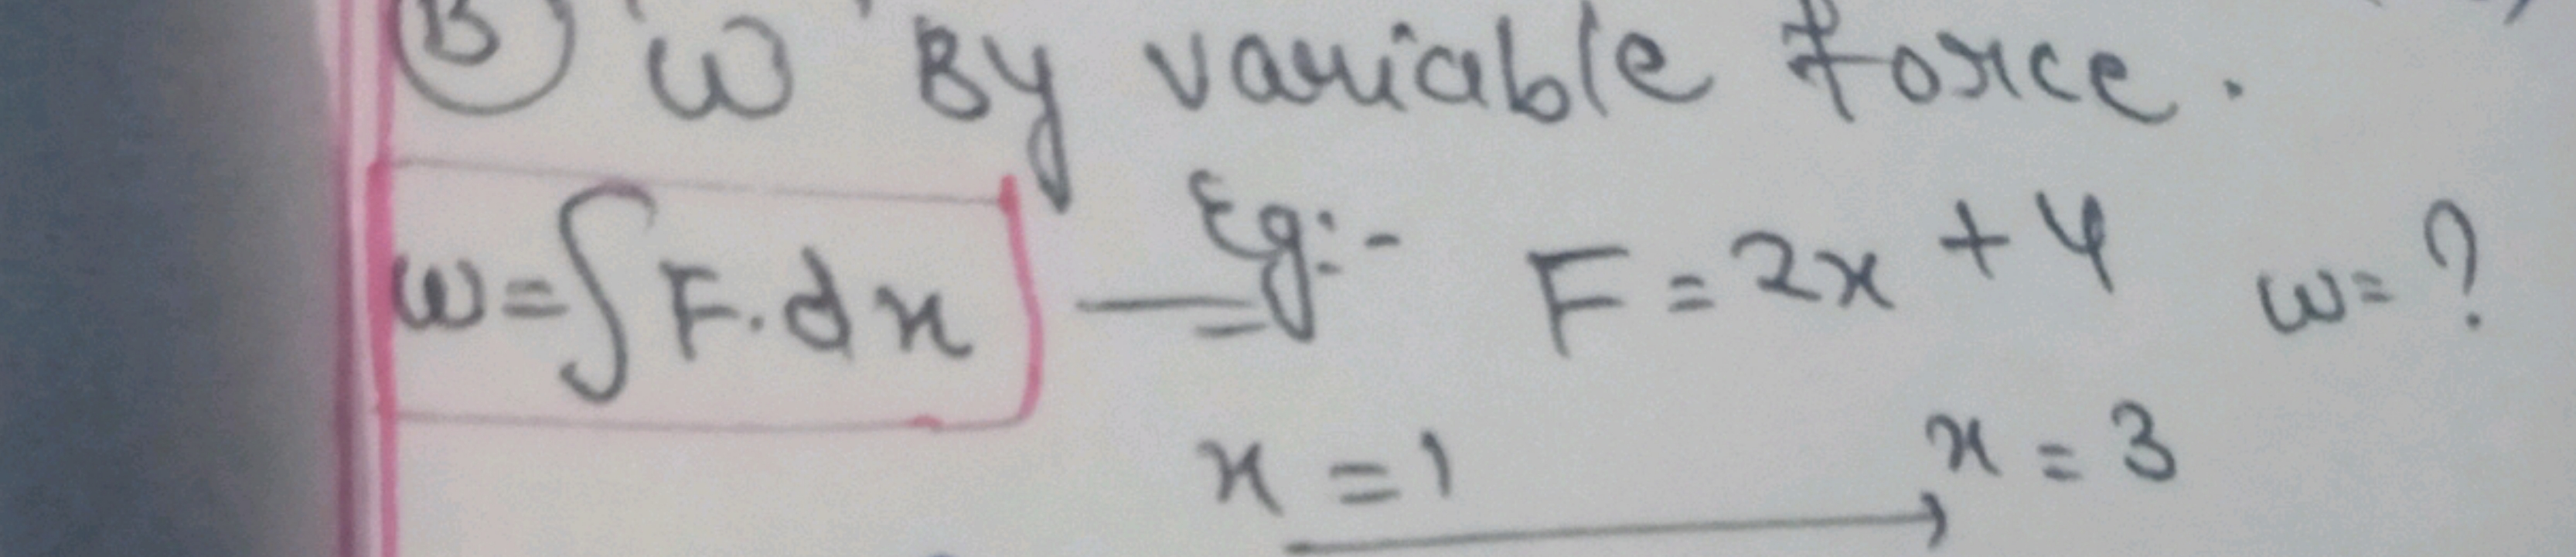 (15) w By variable force.
ω=∫F⋅dx g:- x=1x=2x+4​=?
